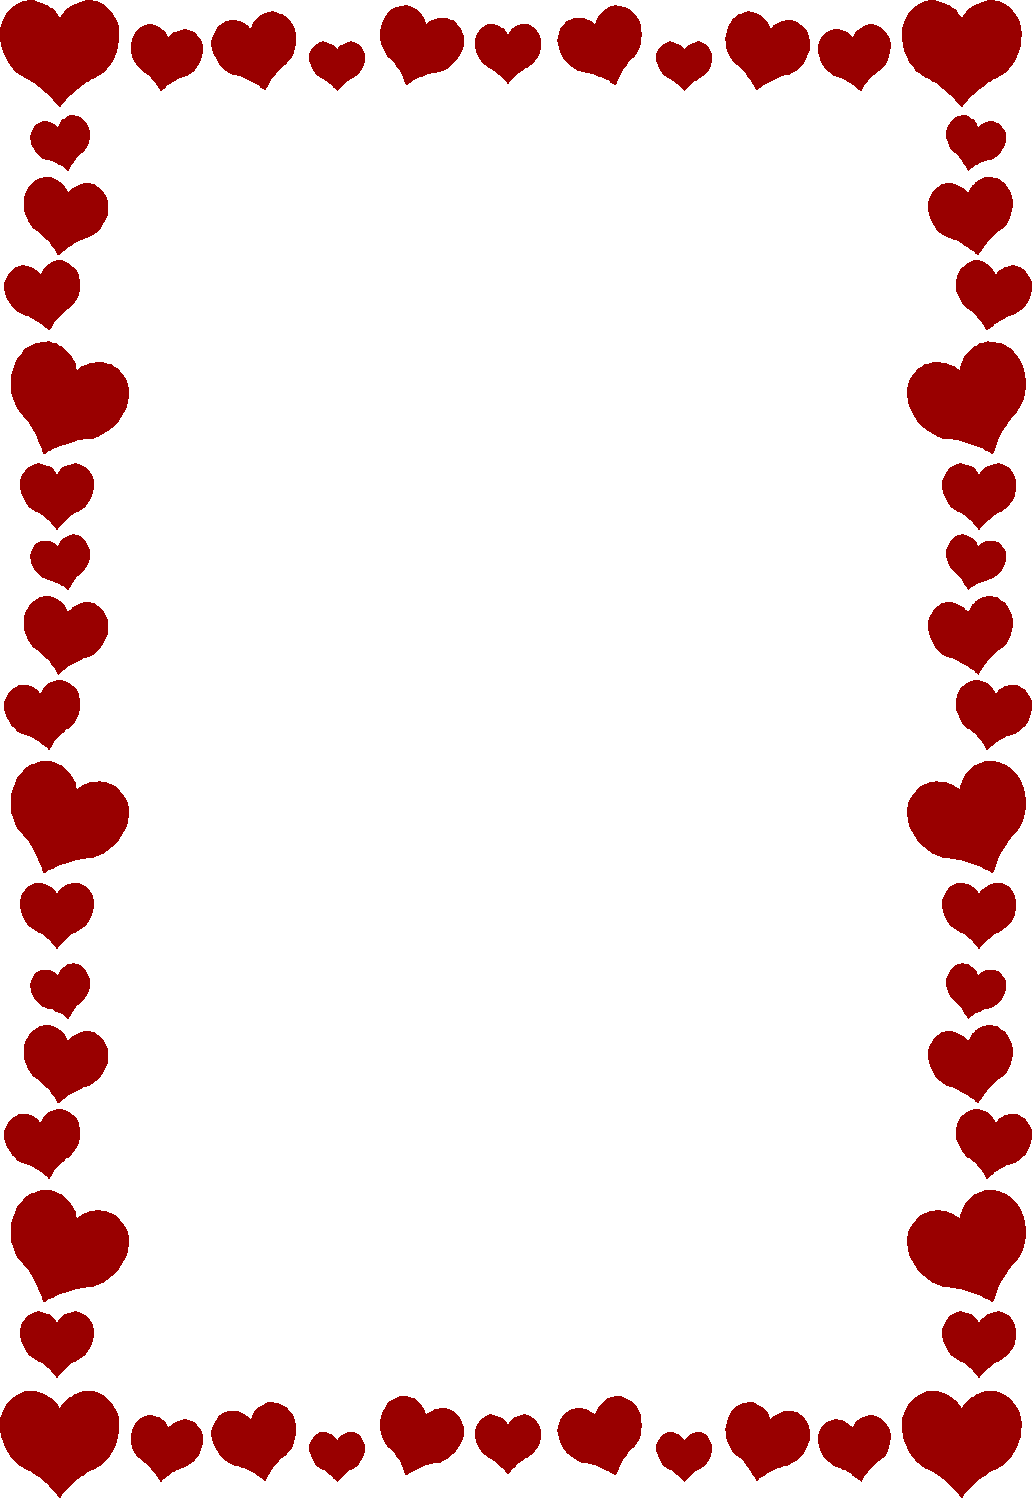 2 wedding heart border clipart. Free cliparts that you can download to you computer and use in your designs.